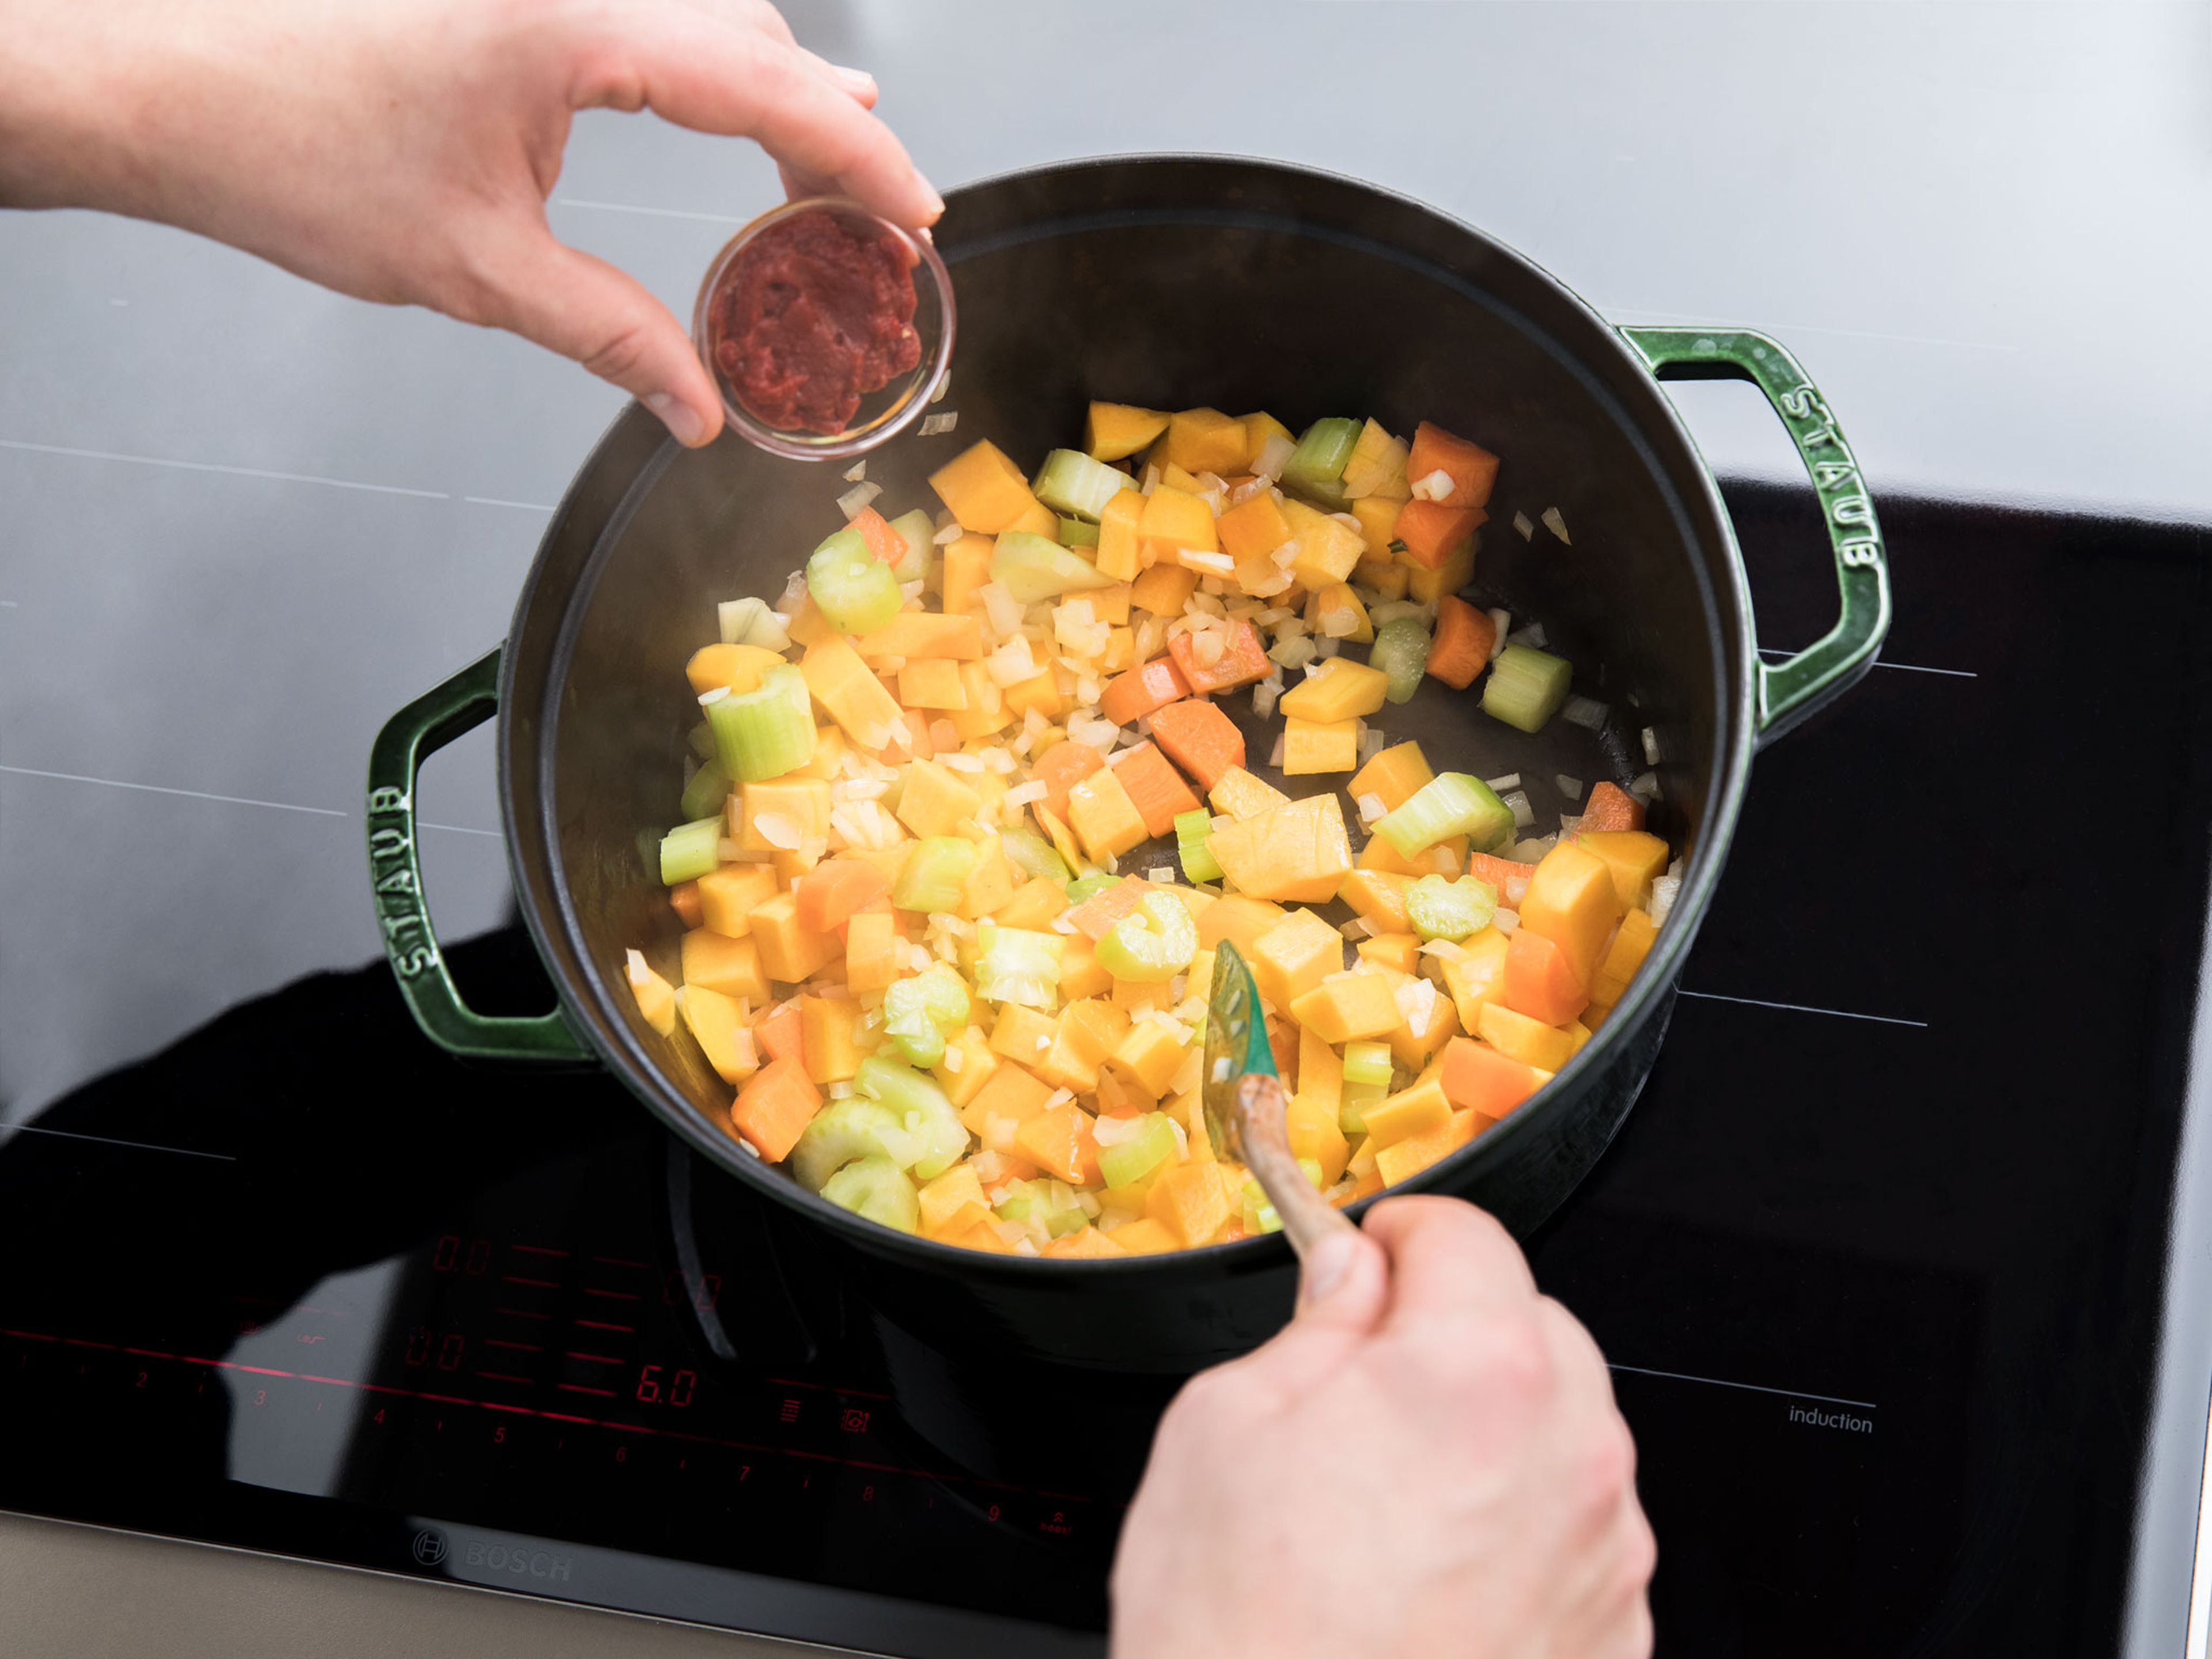 Heat olive oil in a large pot over medium heat. Add onions, carrots, butternut squash, and celery and fry for approx. 5 min. Add garlic and fry for another approx. 1 – 2 min. Add tomato paste and chopped herbs and keep frying for approx. 3 min.